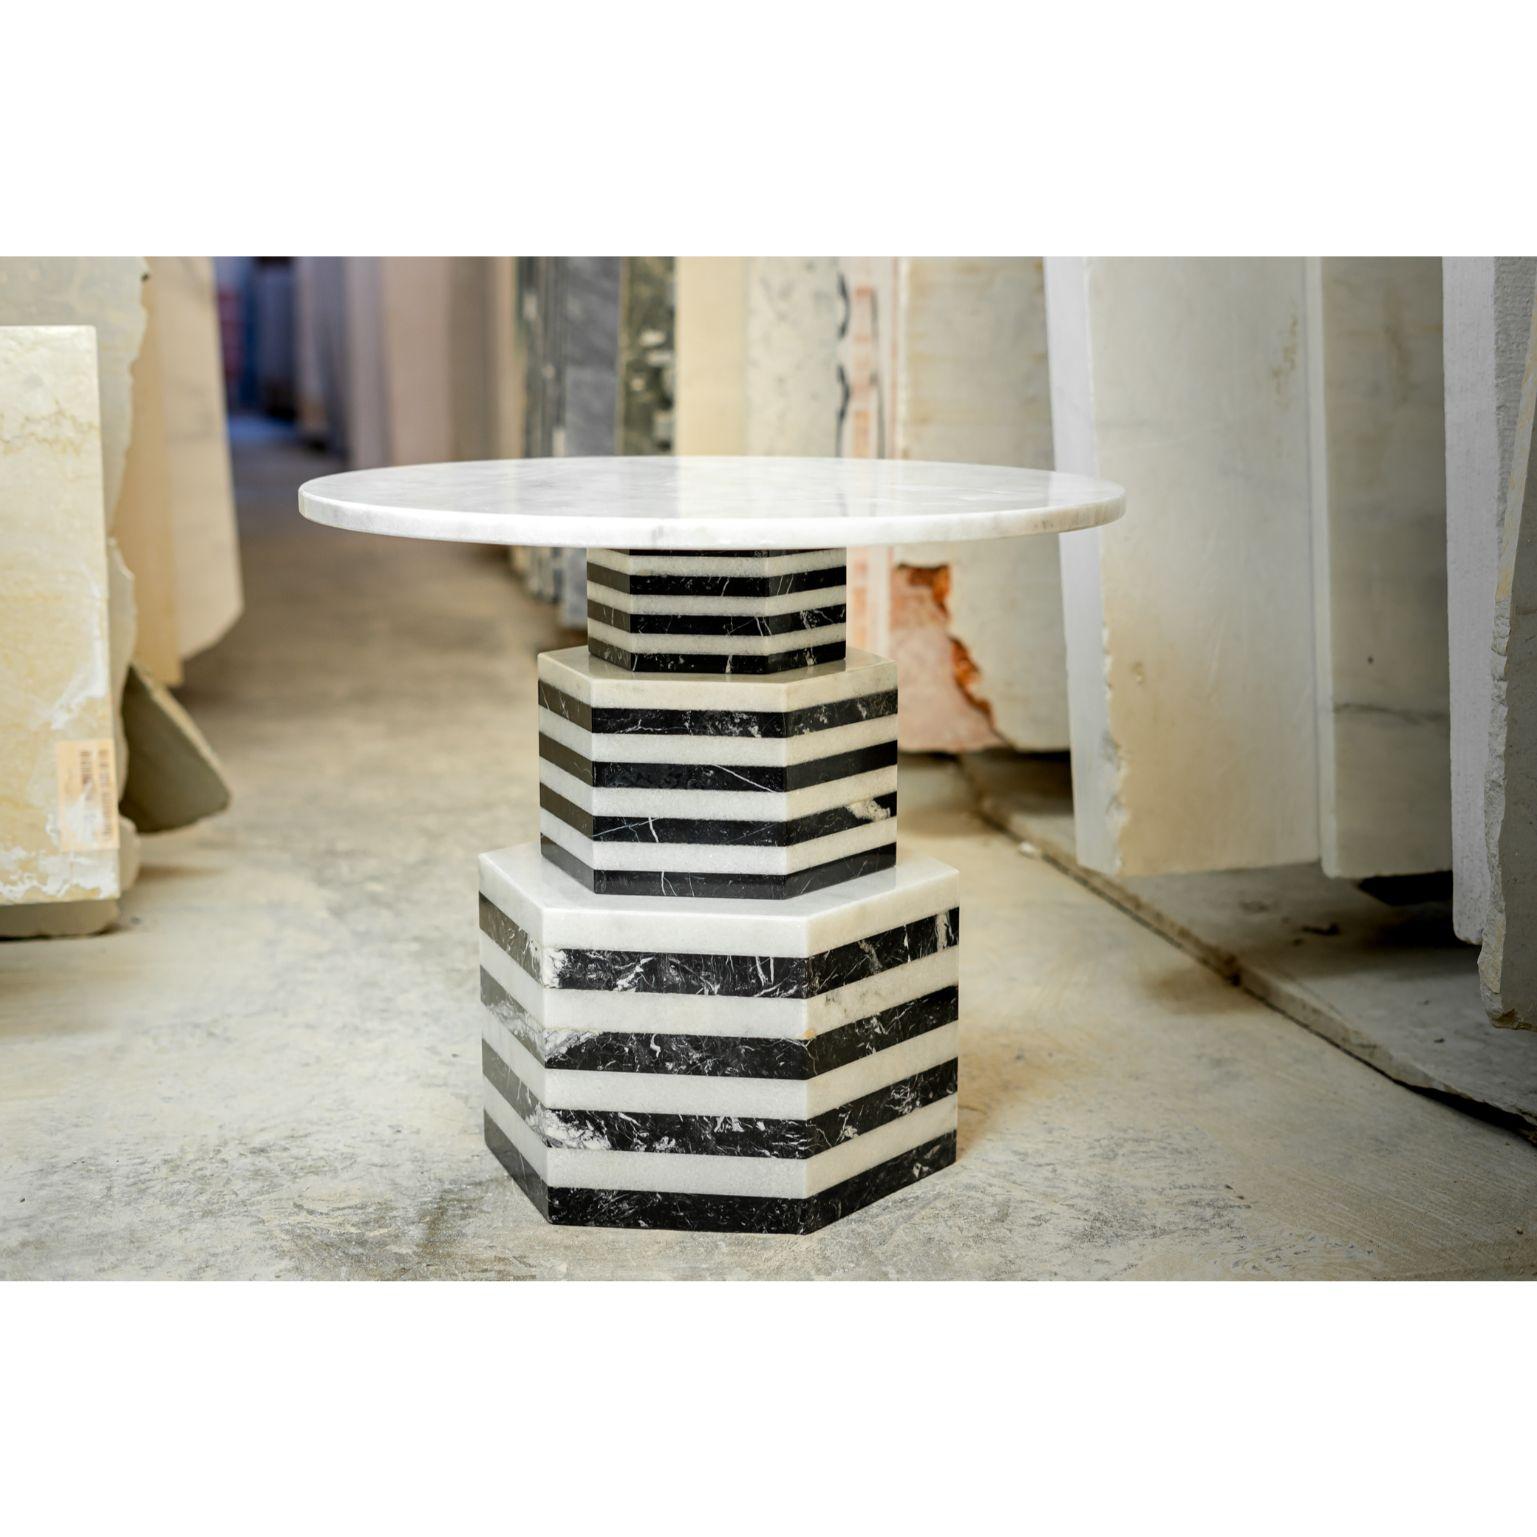 Tower Marble by Essenzia
Materials: Nero marquina, Indian white
Dimensions: 61 x 61 x 50 cm

Also Available: Rosa Portugal,

To evoke the skyscrapers of his home base, Manhattan, Javier Gomez designed Tower Marble side table using and eclectic style